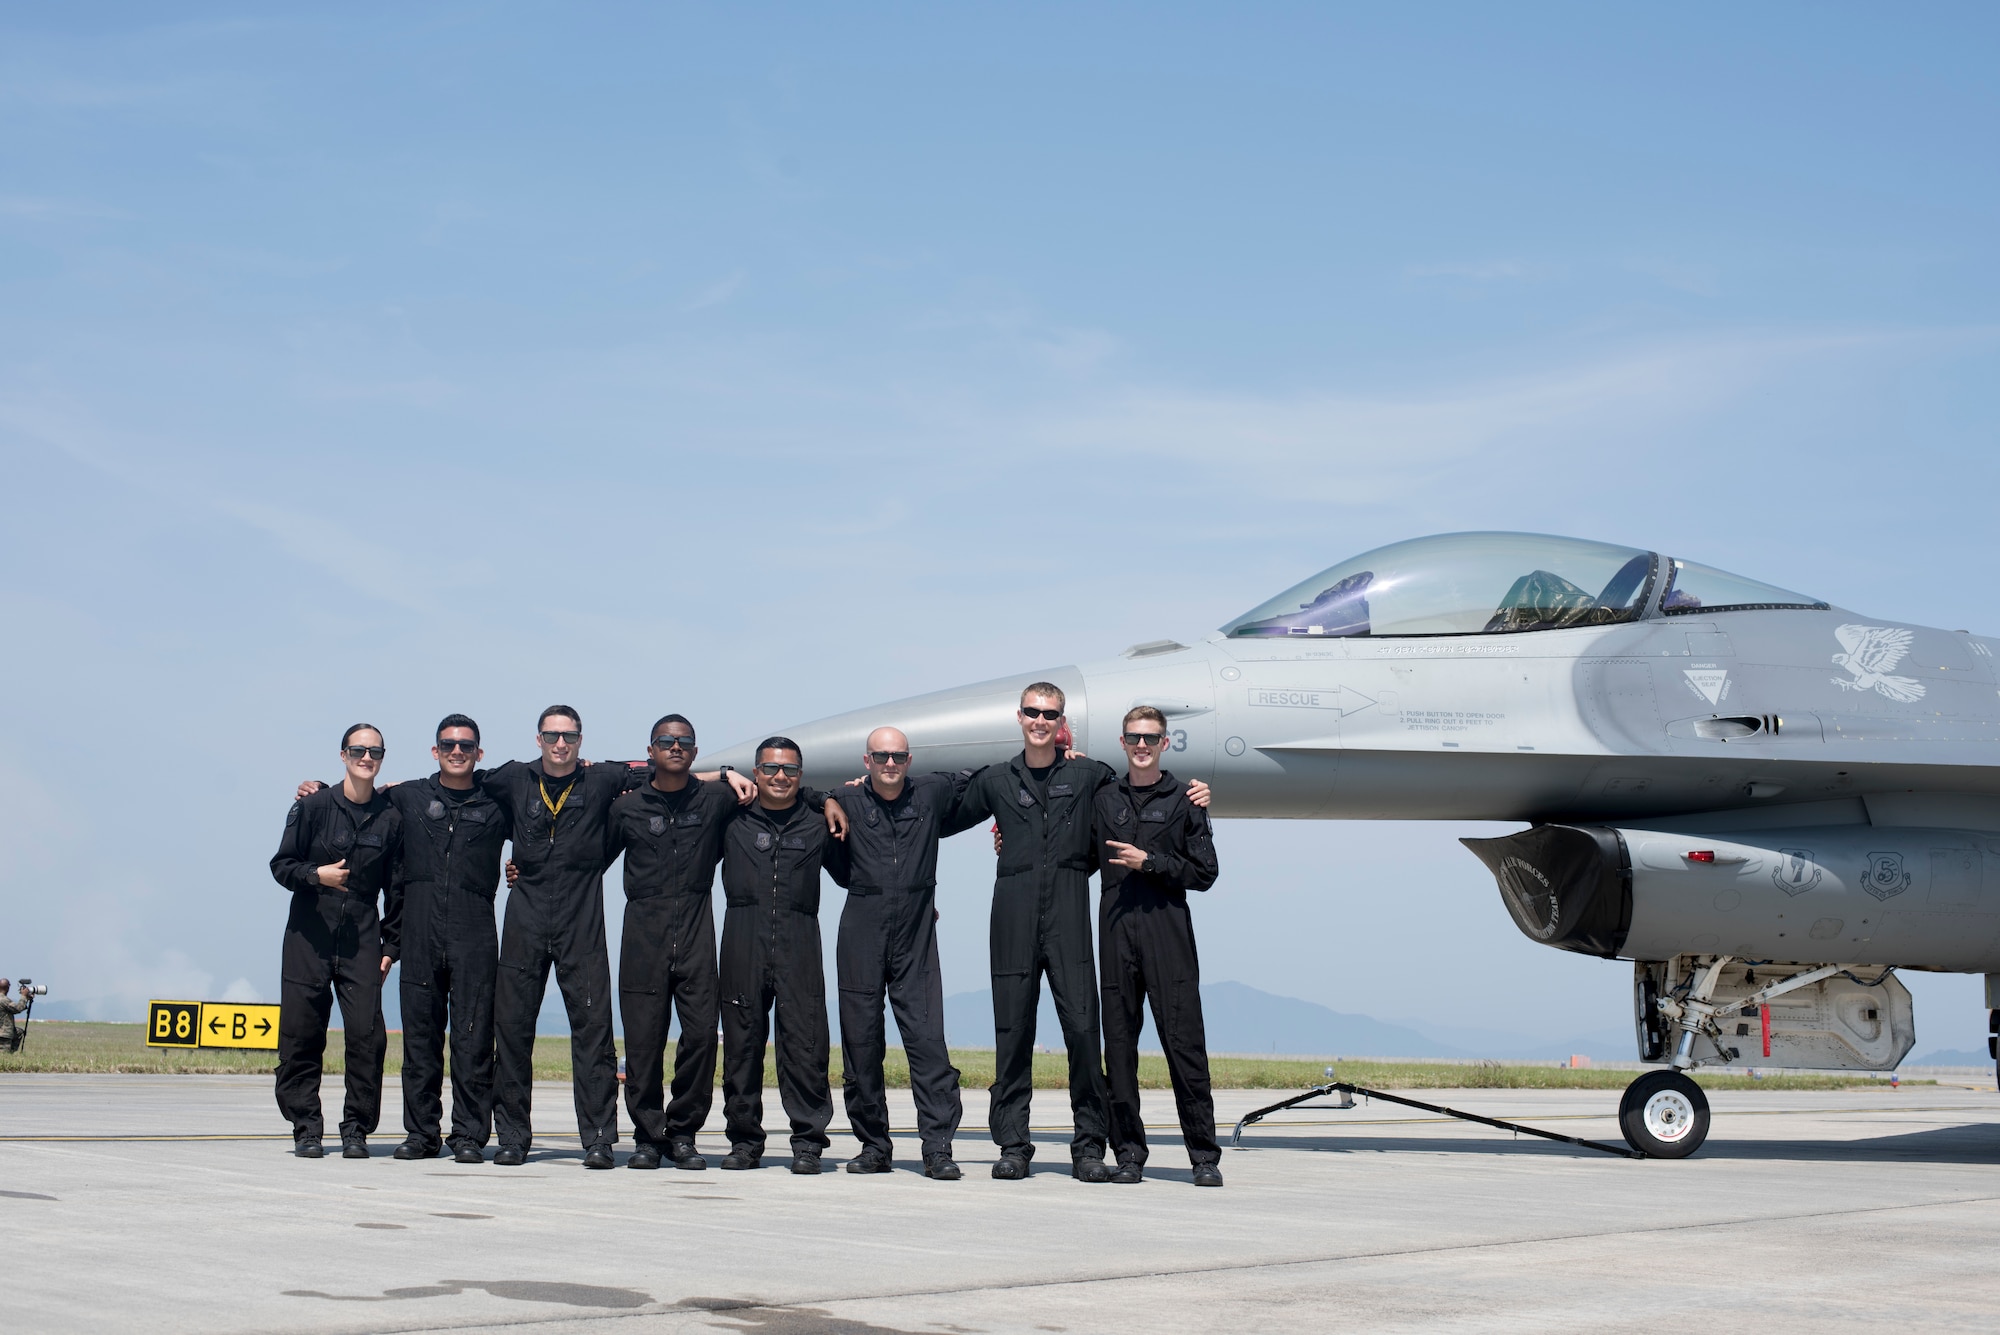 The Pacific Air Forces F-16 Fighting Falcon Demonstration Team pauses for a photo at the 43rd Japan Maritime Self-Defense Force – Marine Corps Air Station Iwakuni Friendship Day 2019 at MCAS Iwakuni, Japan, May 5, 2019. U.S. Air Force Capt. Jacob “Primo” Impellizzeri, the PACAF F-16 Fighting Falcon Demo Team commander and pilot, oversees the team which consists of three crew chiefs, two avionics specialists, one electrical and engineering specialist, one engines maintainer, one superintendent and a safety observer. (U.S. Air Force photo by Senior Airman Collette Brooks)